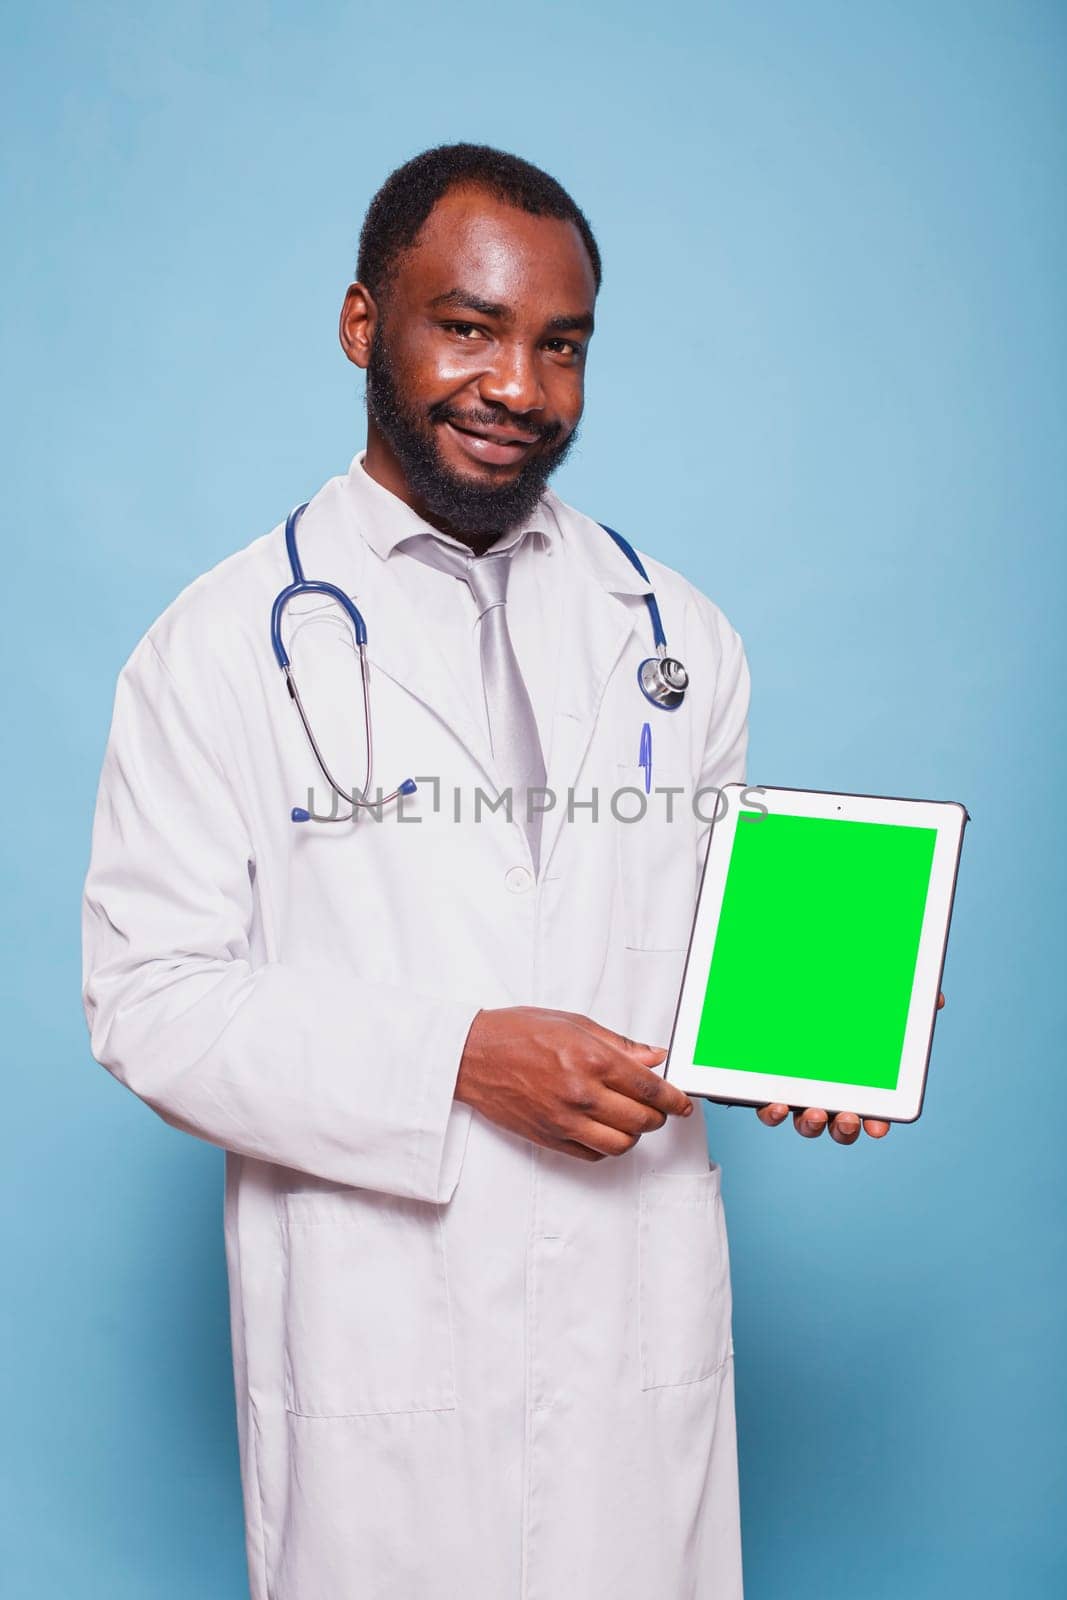 Portrait of black man wearing a stethoscope and lab coat is holding a tablet with green screen. African american doctor grasping device displaying blank chromakey mockup template.